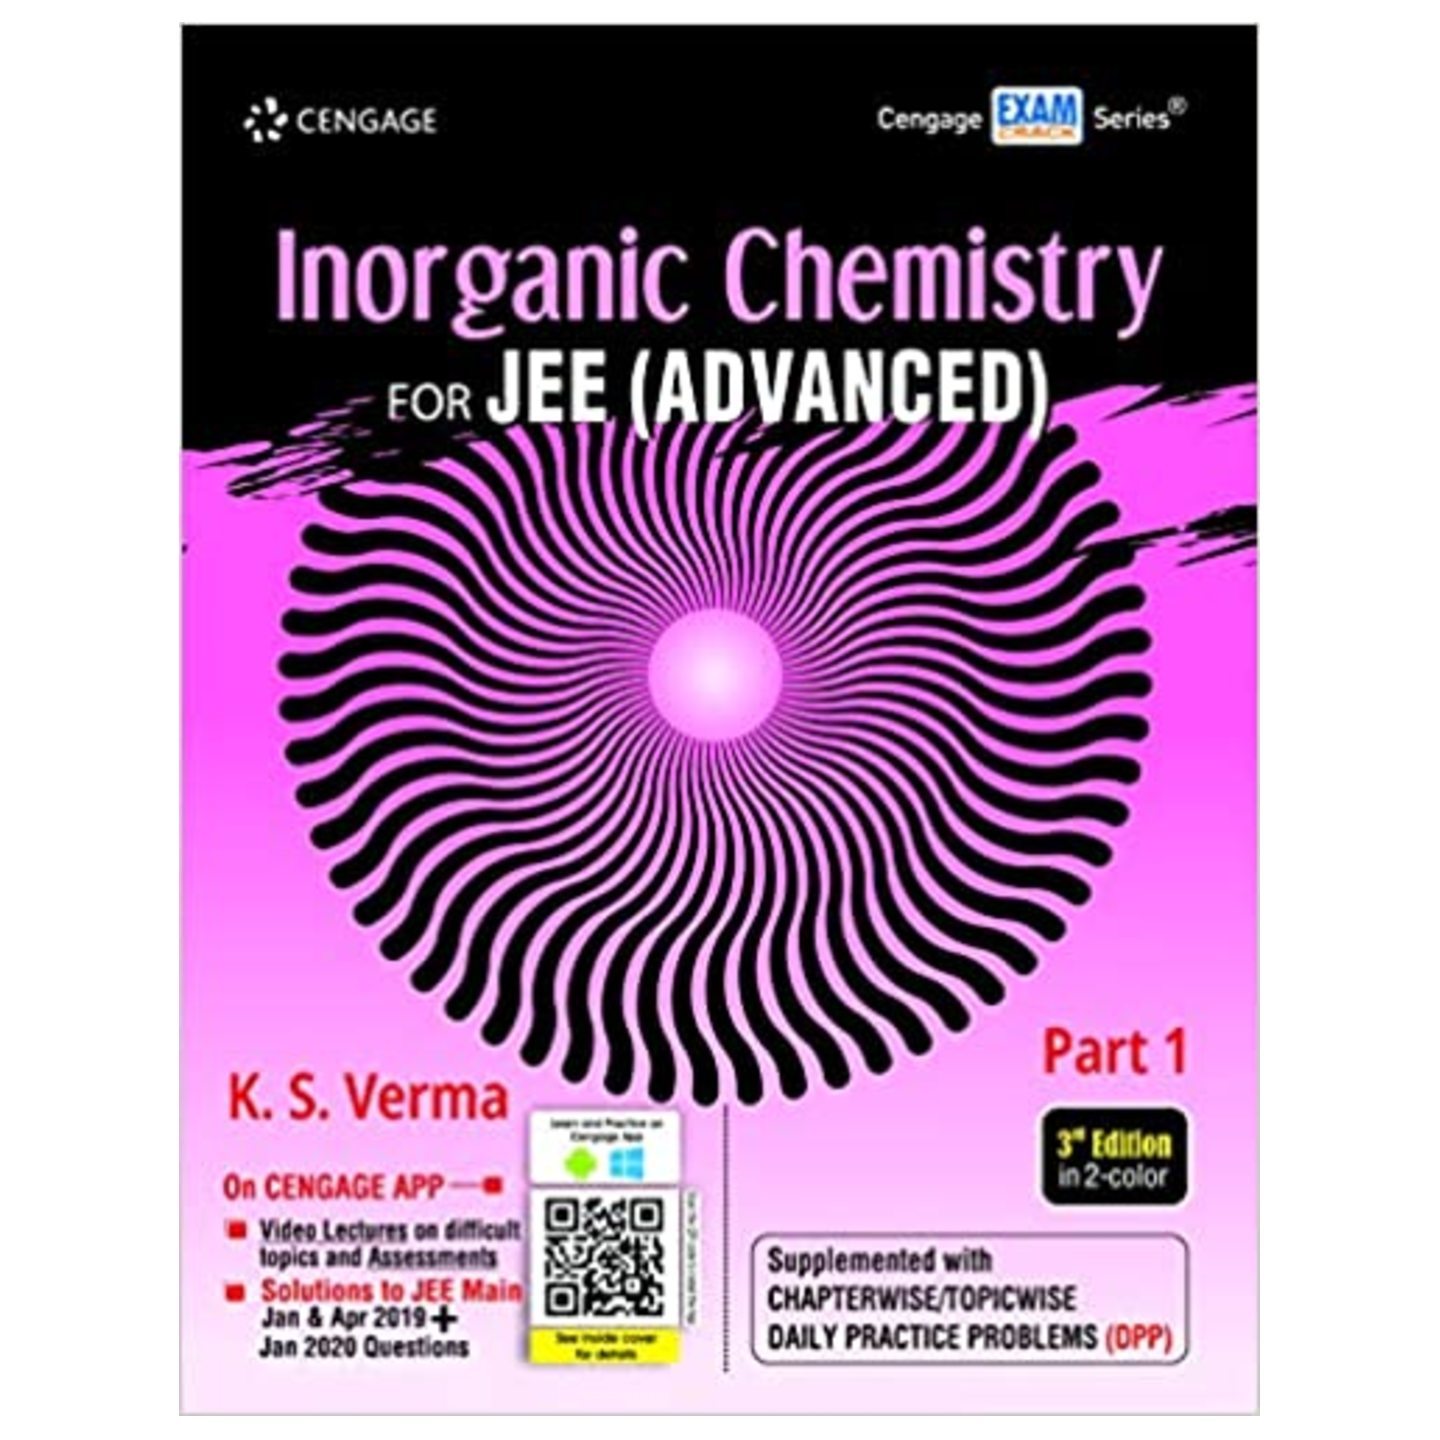 Inorganic Chemistry for JEE Advanced Part 1